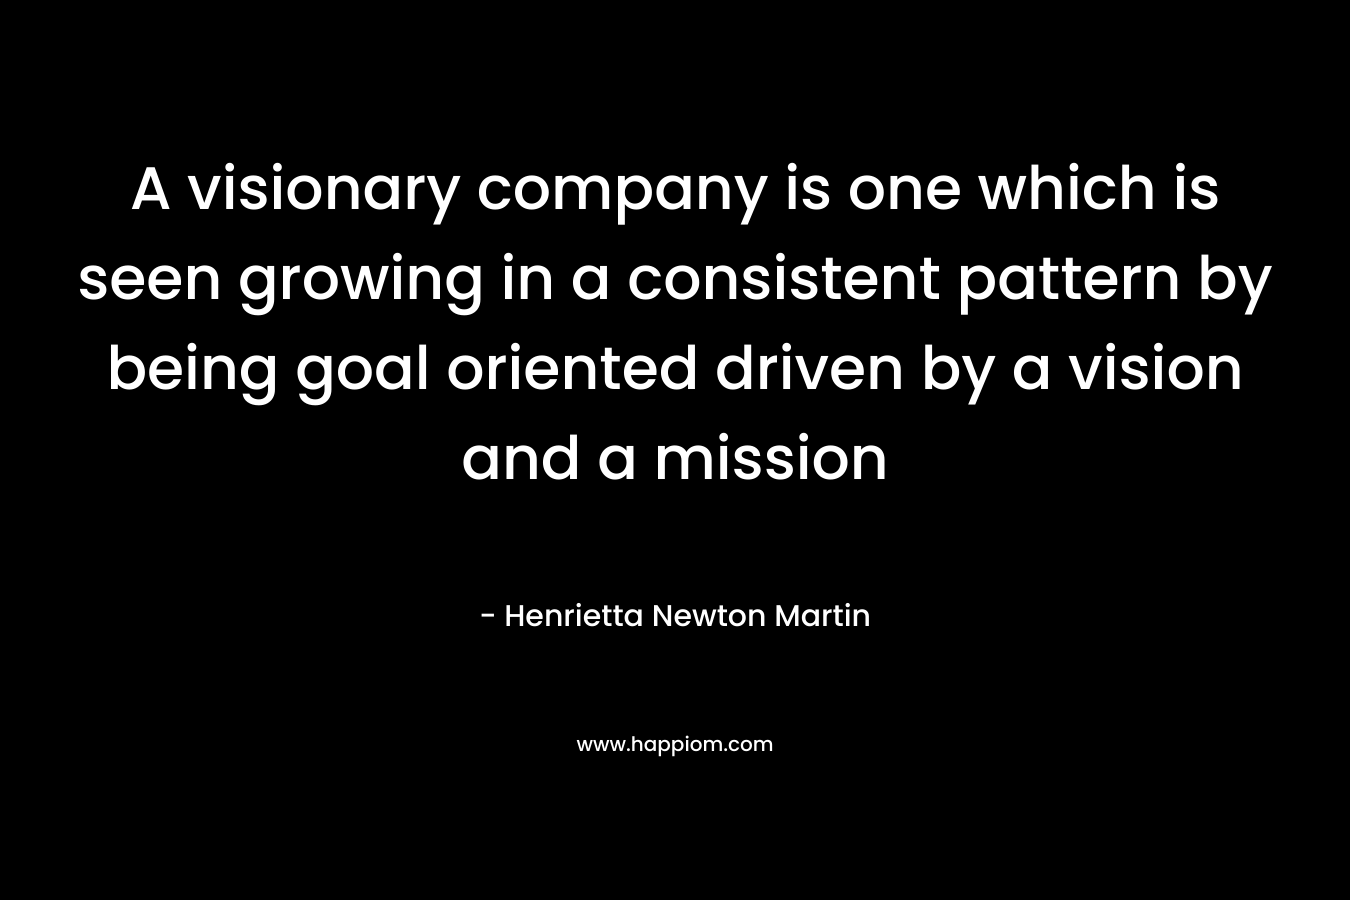 A visionary company is one which is seen growing in a consistent pattern by being goal oriented driven by a vision and a mission – Henrietta Newton Martin